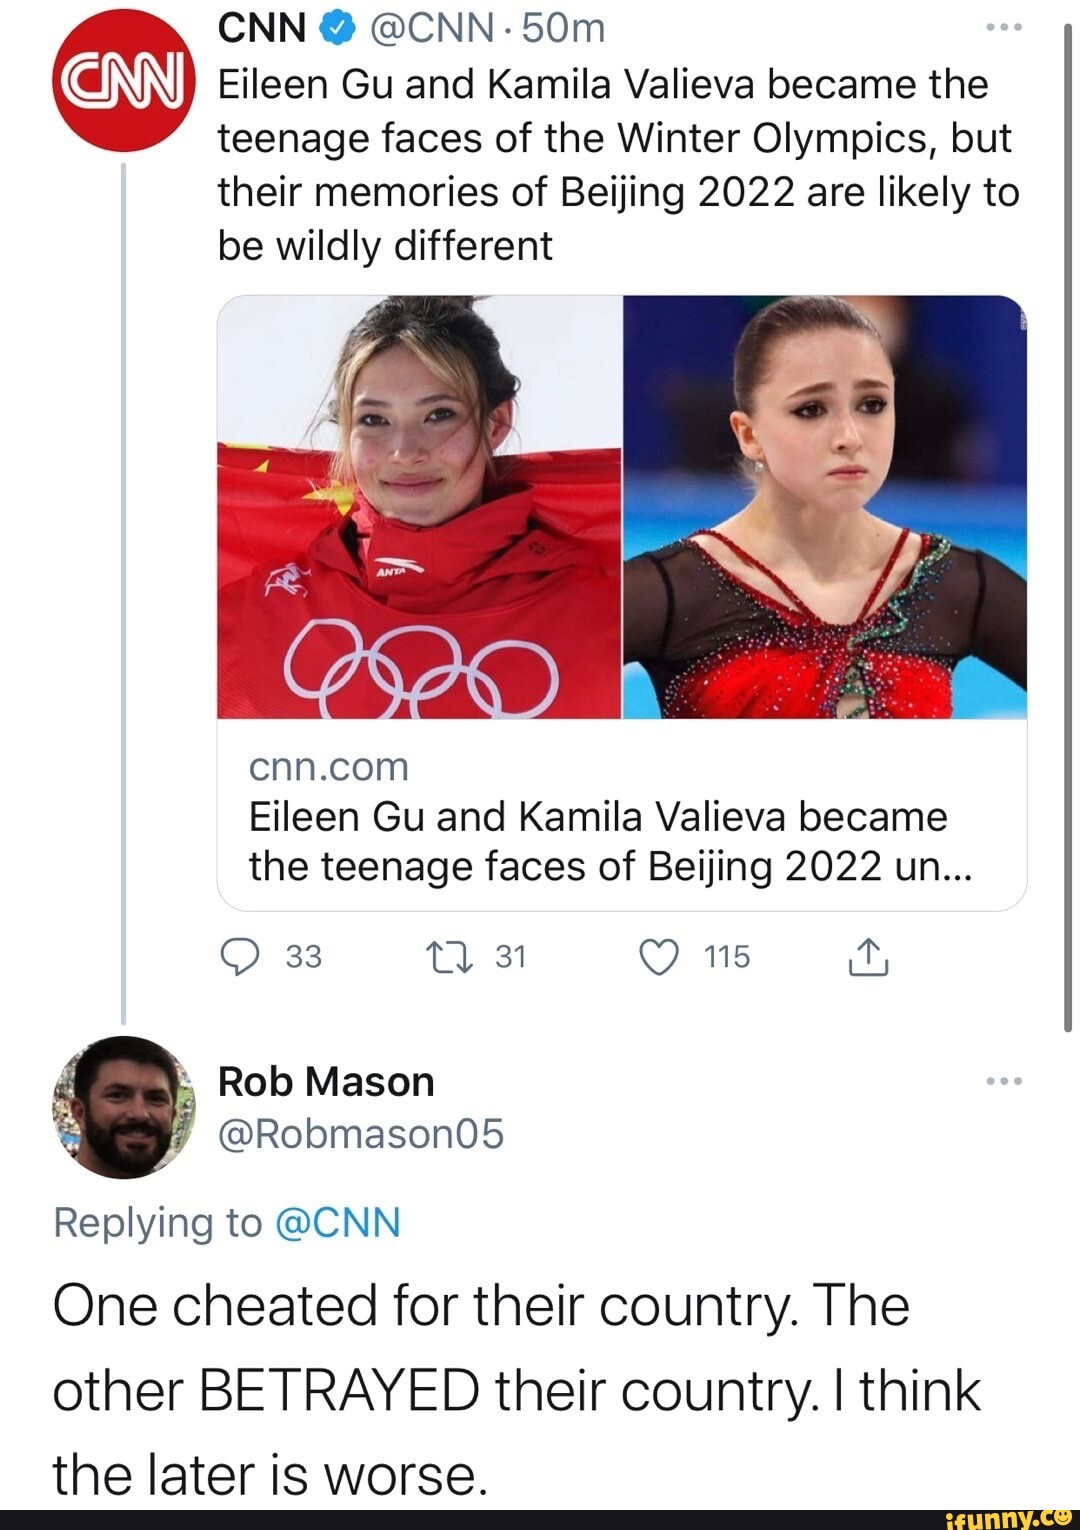 Eileen Gu and Kamila Valieva became the teenage faces of Beijing 2022 under  wildly contrasting circumstances